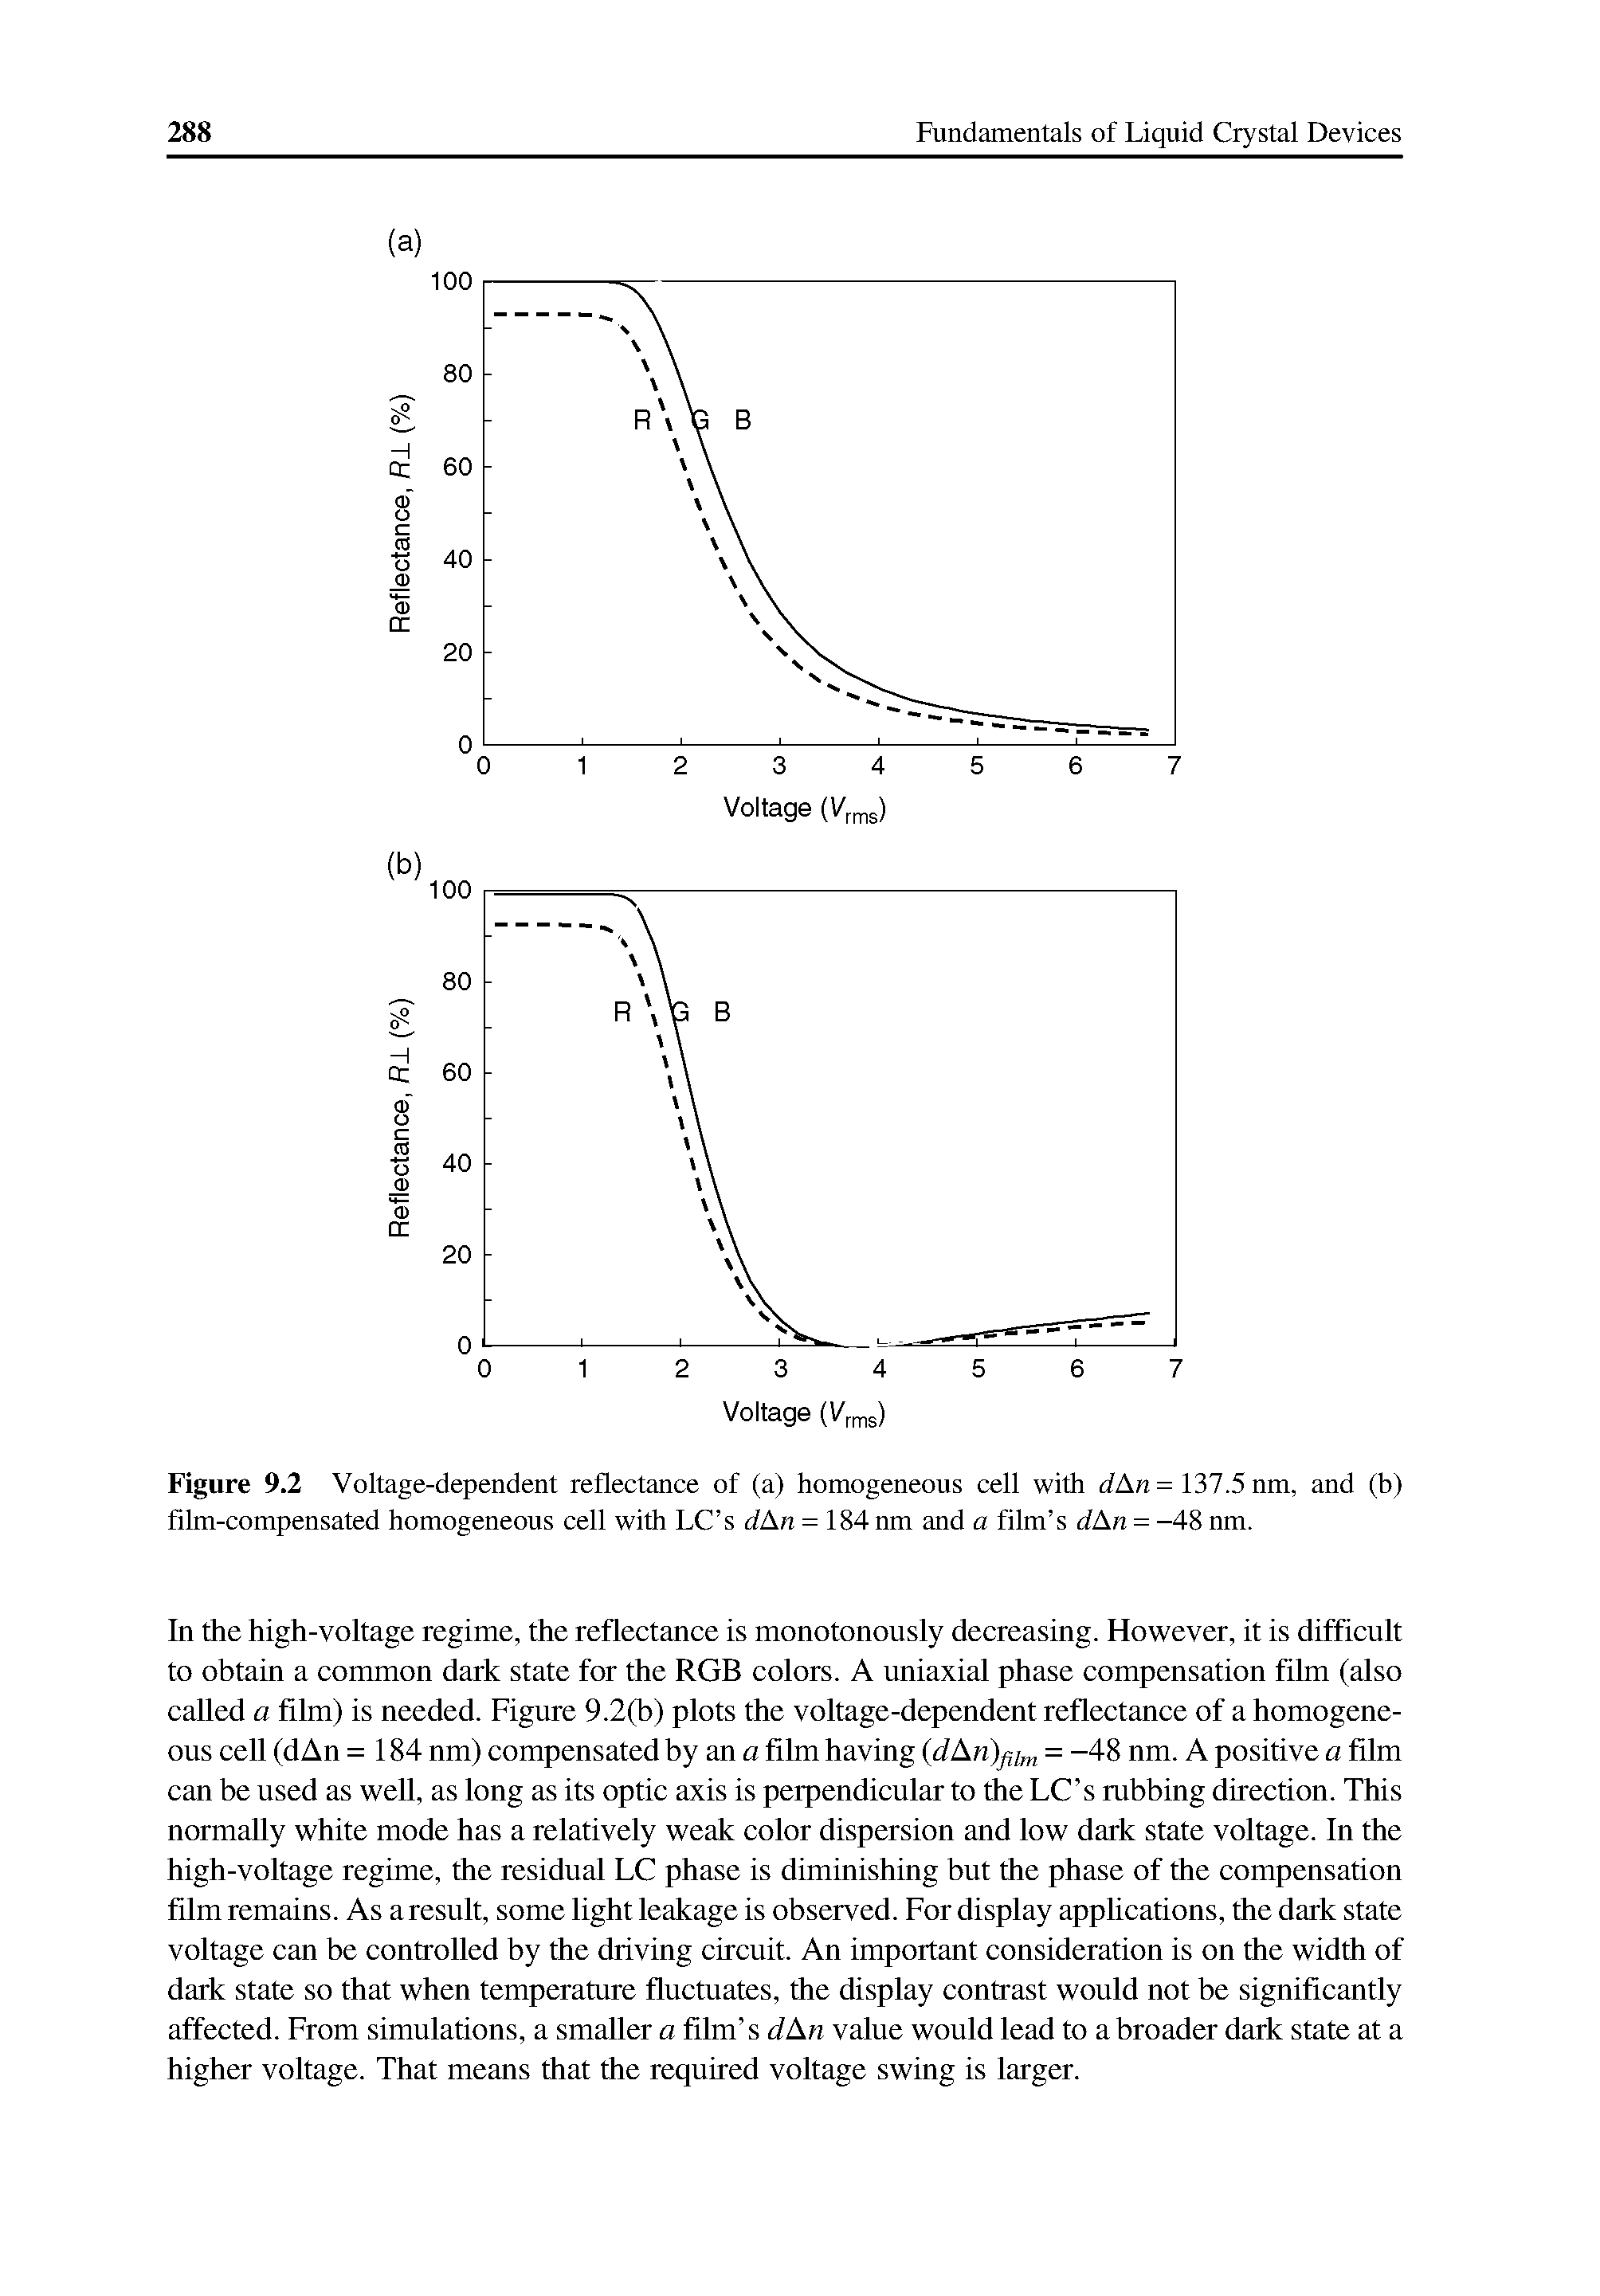 Figure 9.2 Voltage-dependent reflectance of (a) homogeneous cell with dAn = 137.5 nm, and (b) film-compensated homogeneous cell with LC s dAn = 184 nm and a film s dAn = -48 nm.